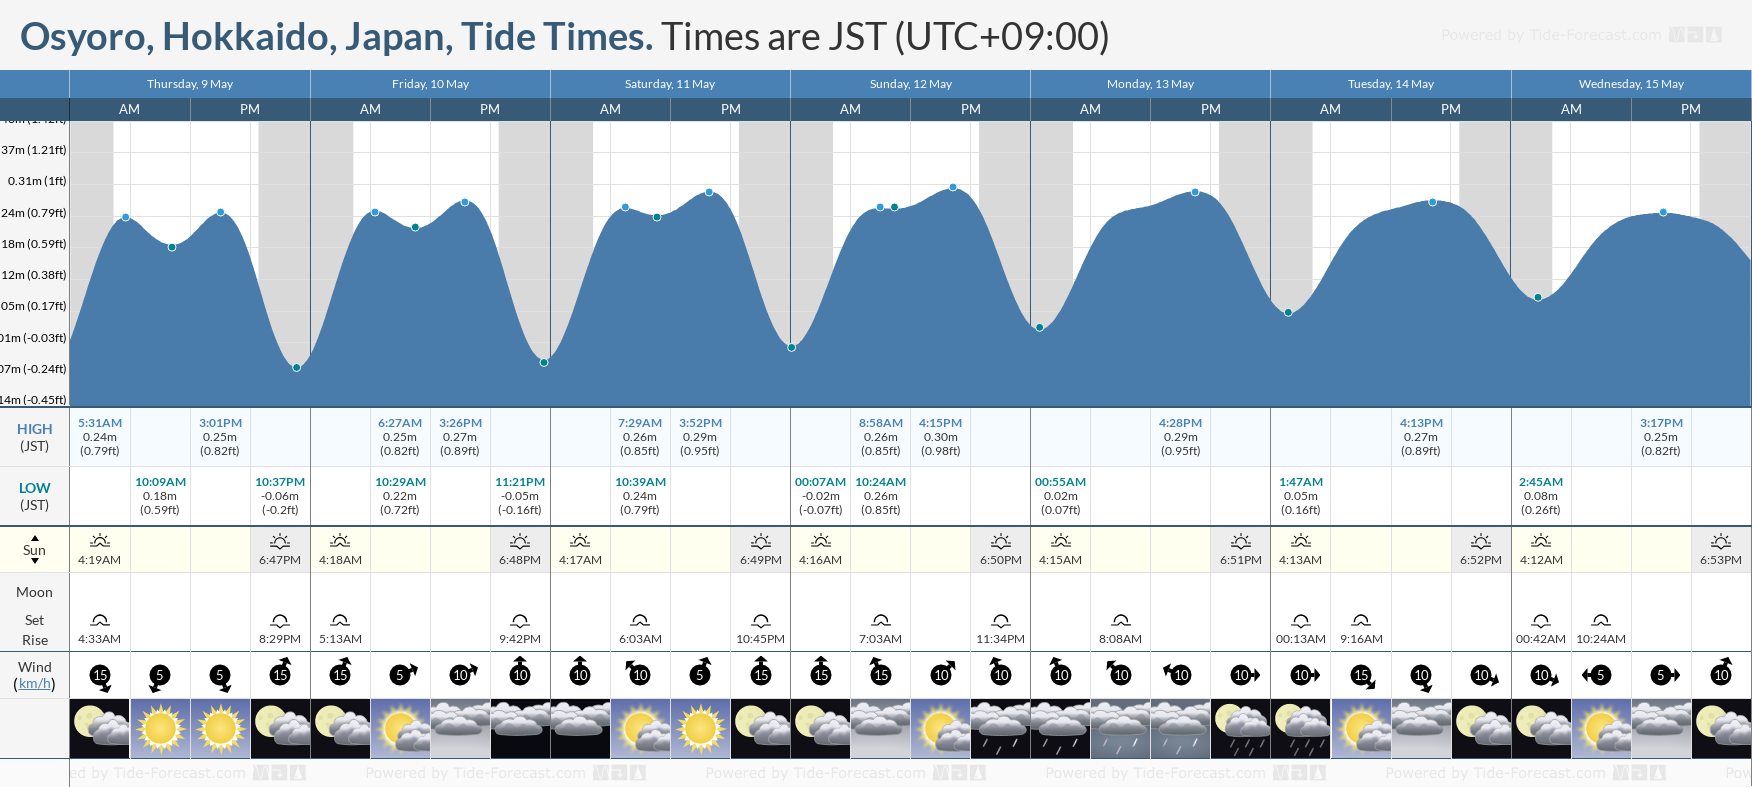 Osyoro, Hokkaido, Japan Tide Chart including high and low tide tide times for the next 7 days